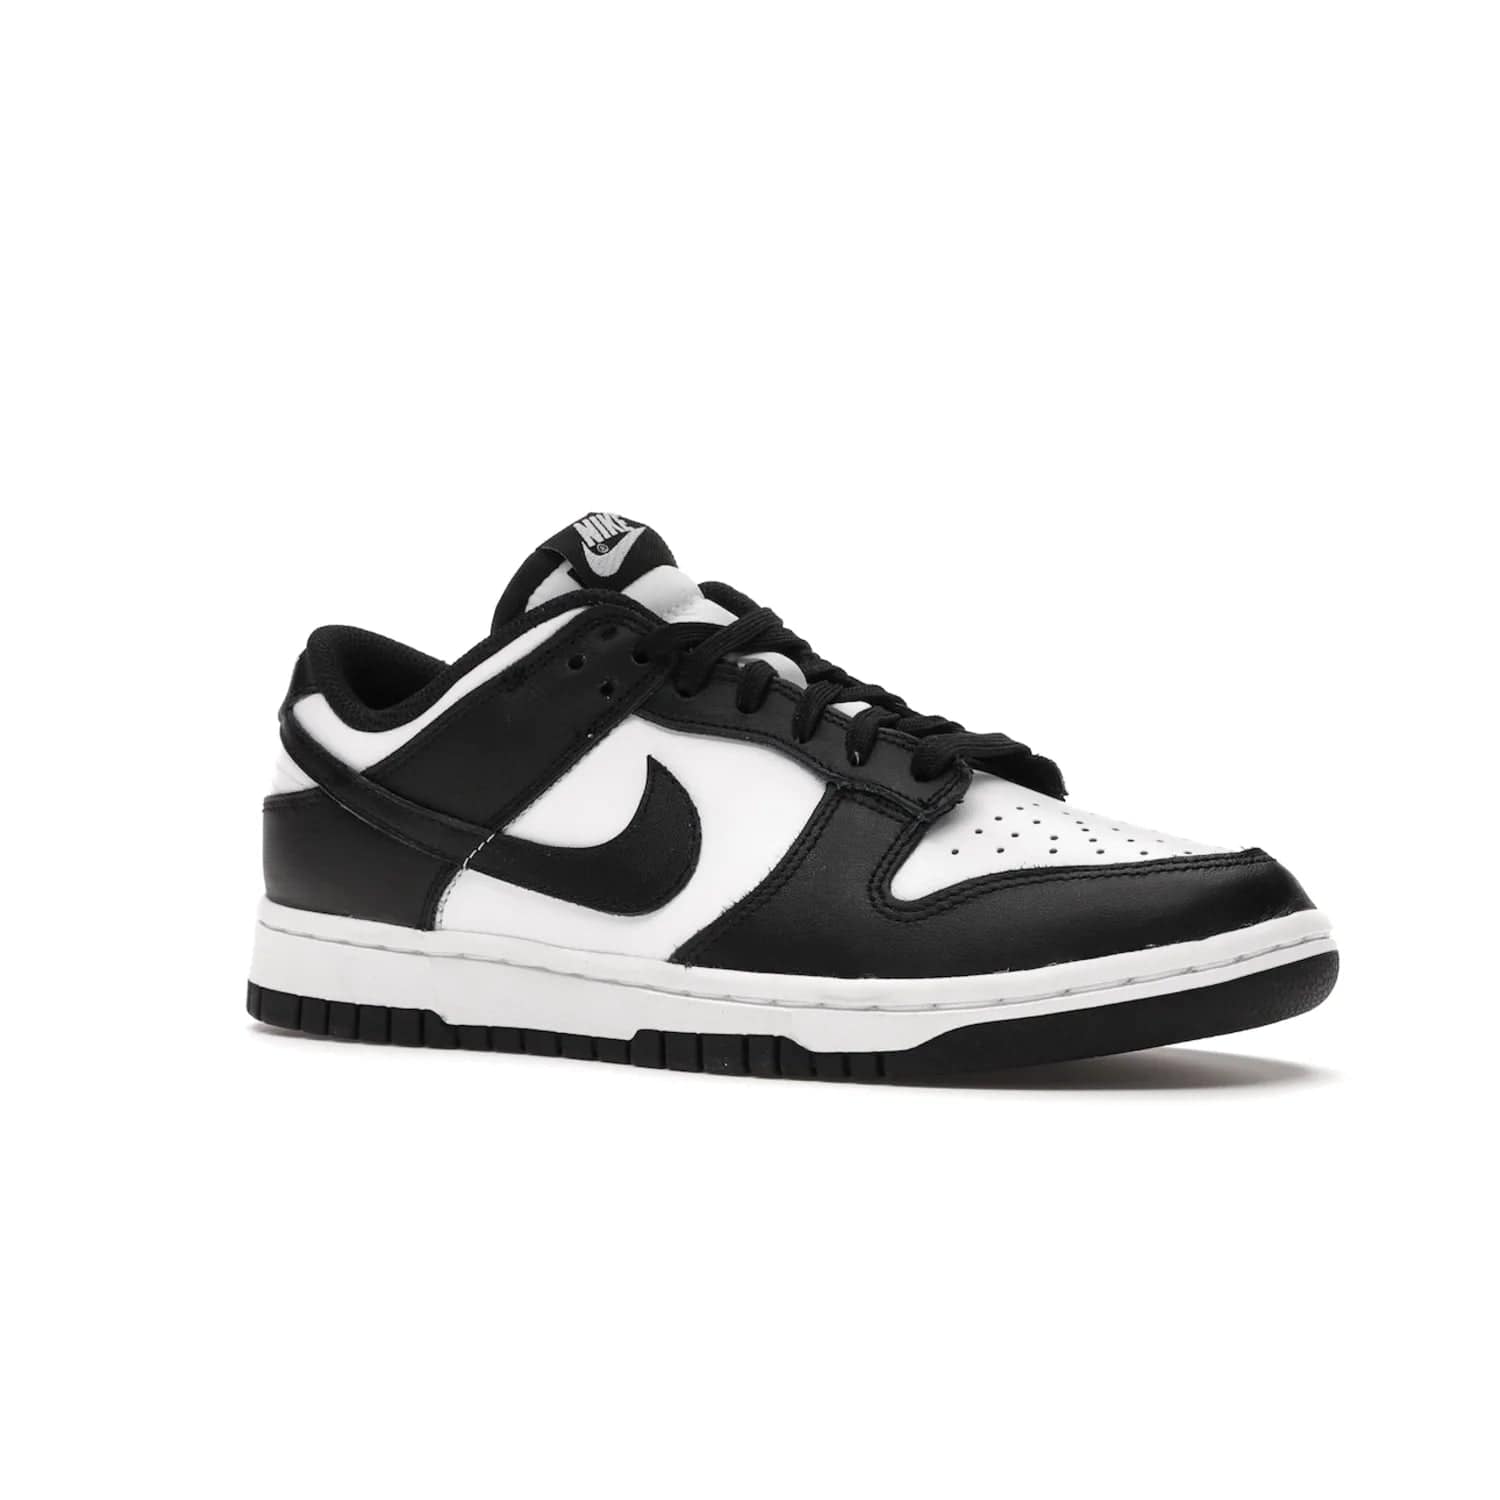 Nike Dunk Low Retro White Black Panda (2021) (Women's) - Image 4 - Only at www.BallersClubKickz.com - Say hello to the new Nike Dunk Low Retro White Black Panda (2021) (Women's)! White & black leather upper with Nike Swoosh logo. Get your pair for $100 in March 2021! Shop now!